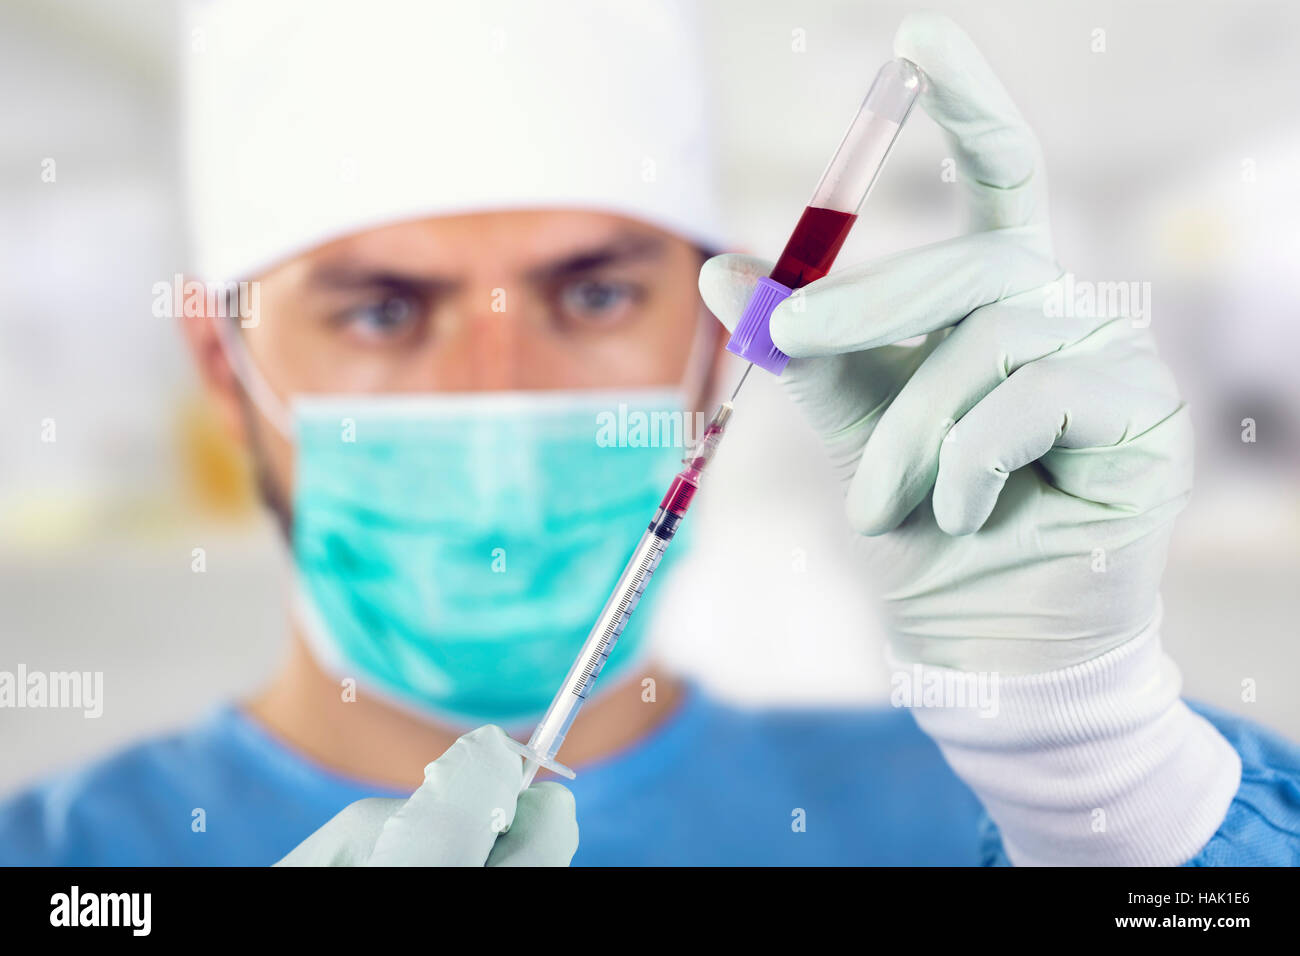 blood analysis - doctor with syringe in front of face Stock Photo